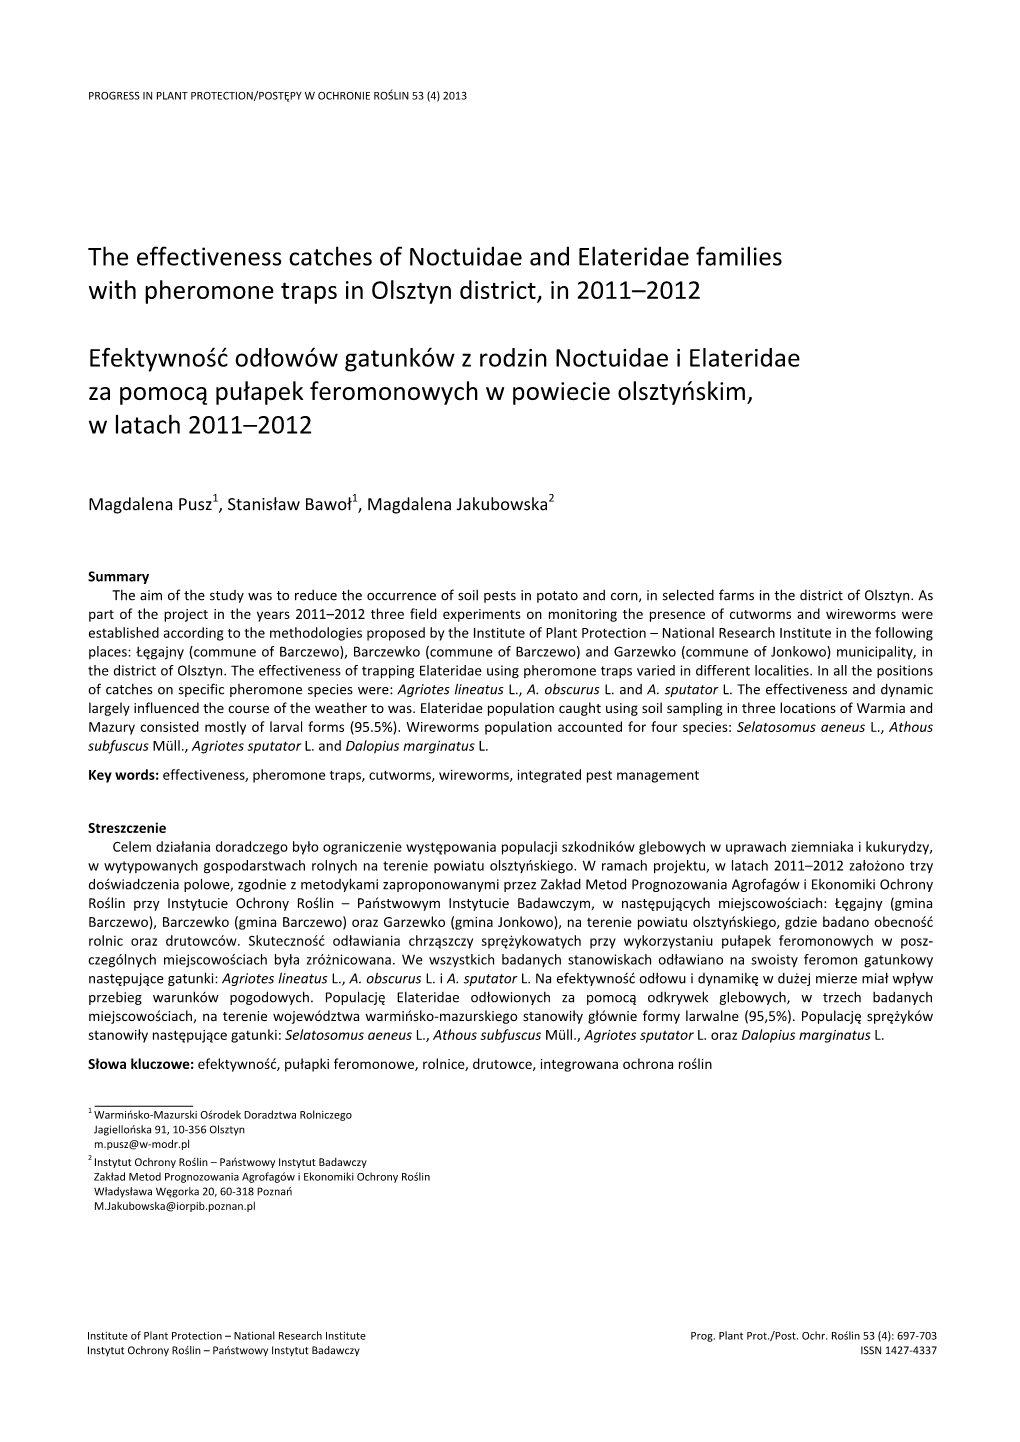 The Effectiveness Catches of Noctuidae and Elateridae Families with Pheromone Traps in Olsztyn District, in 2011–2012